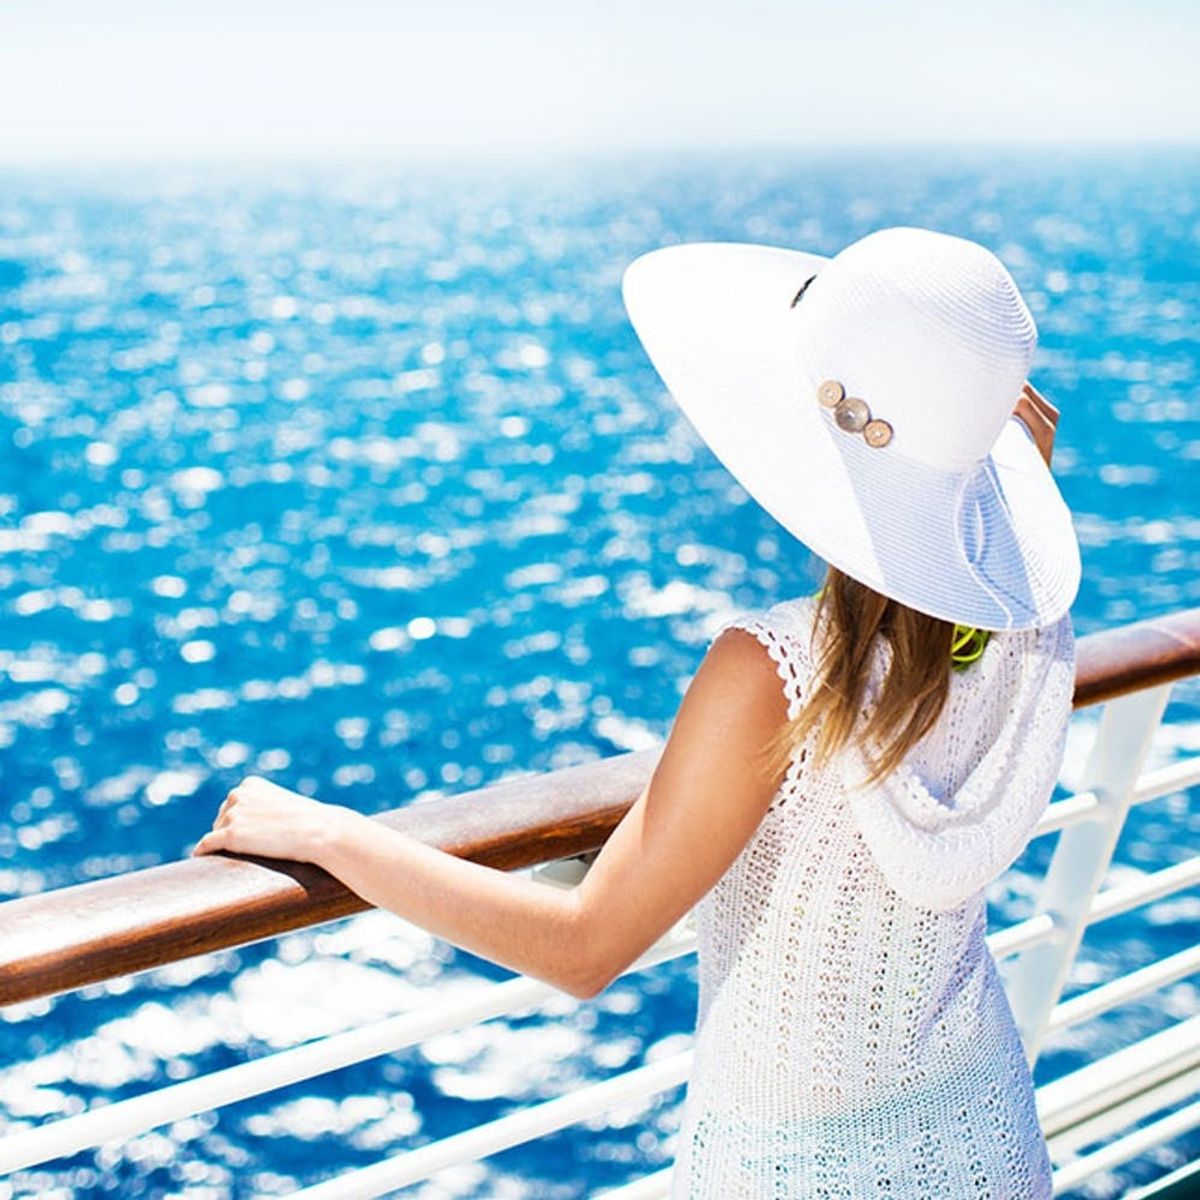 5 Trips Around the World That Will Make You Fall in Love With Cruises